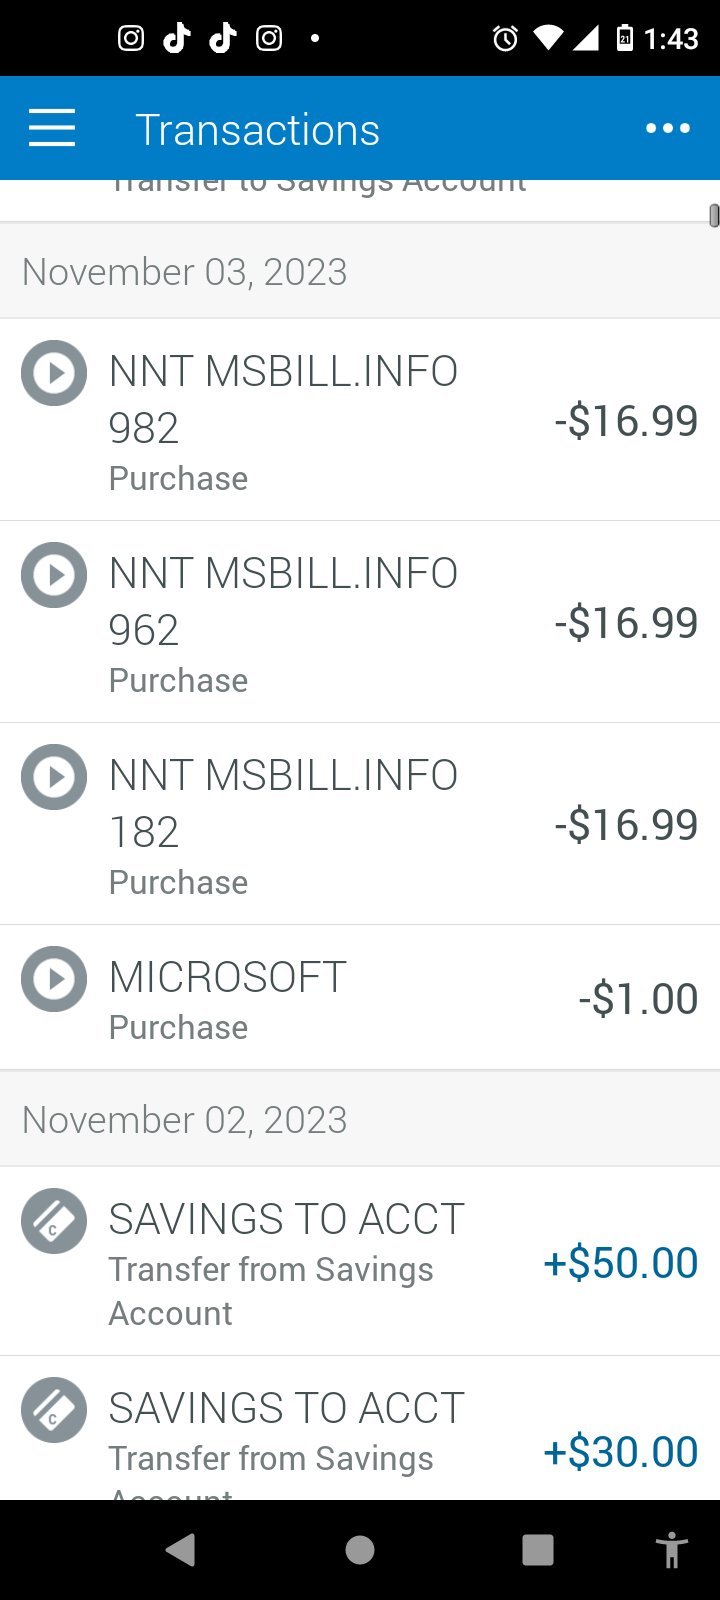 My electronic account with MS charges on 11/3/23